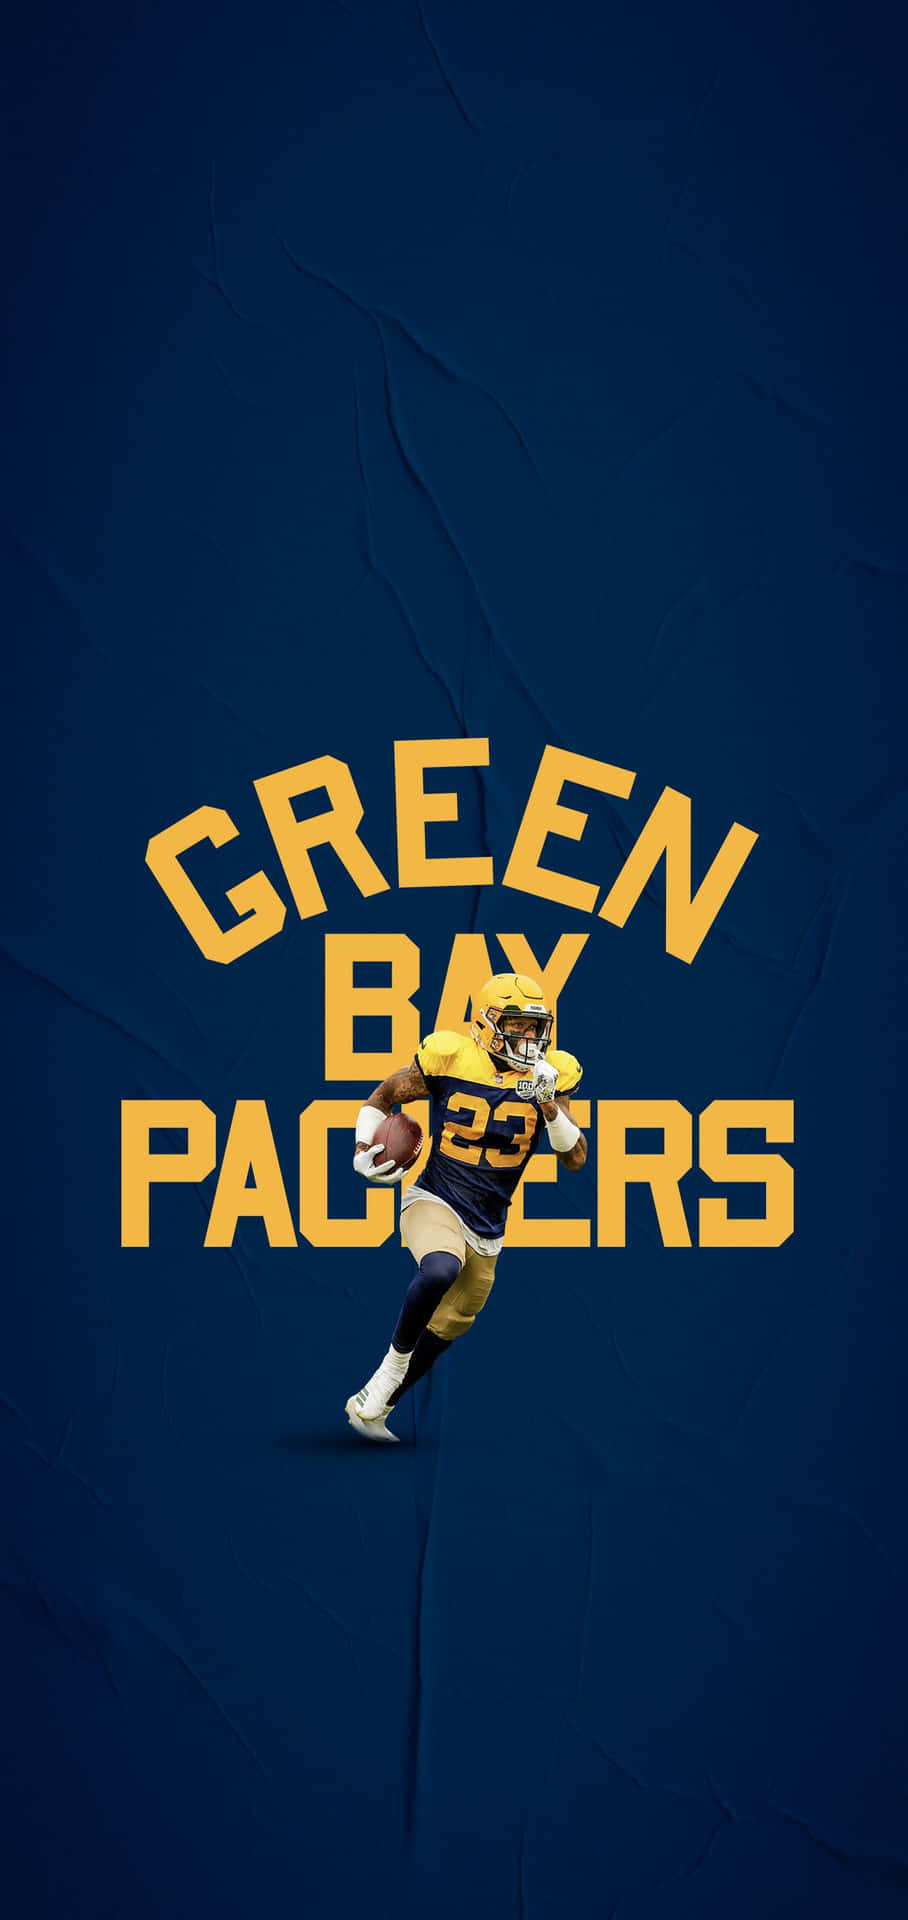 Experience the Thrill of the Green Bay Packers Stadium